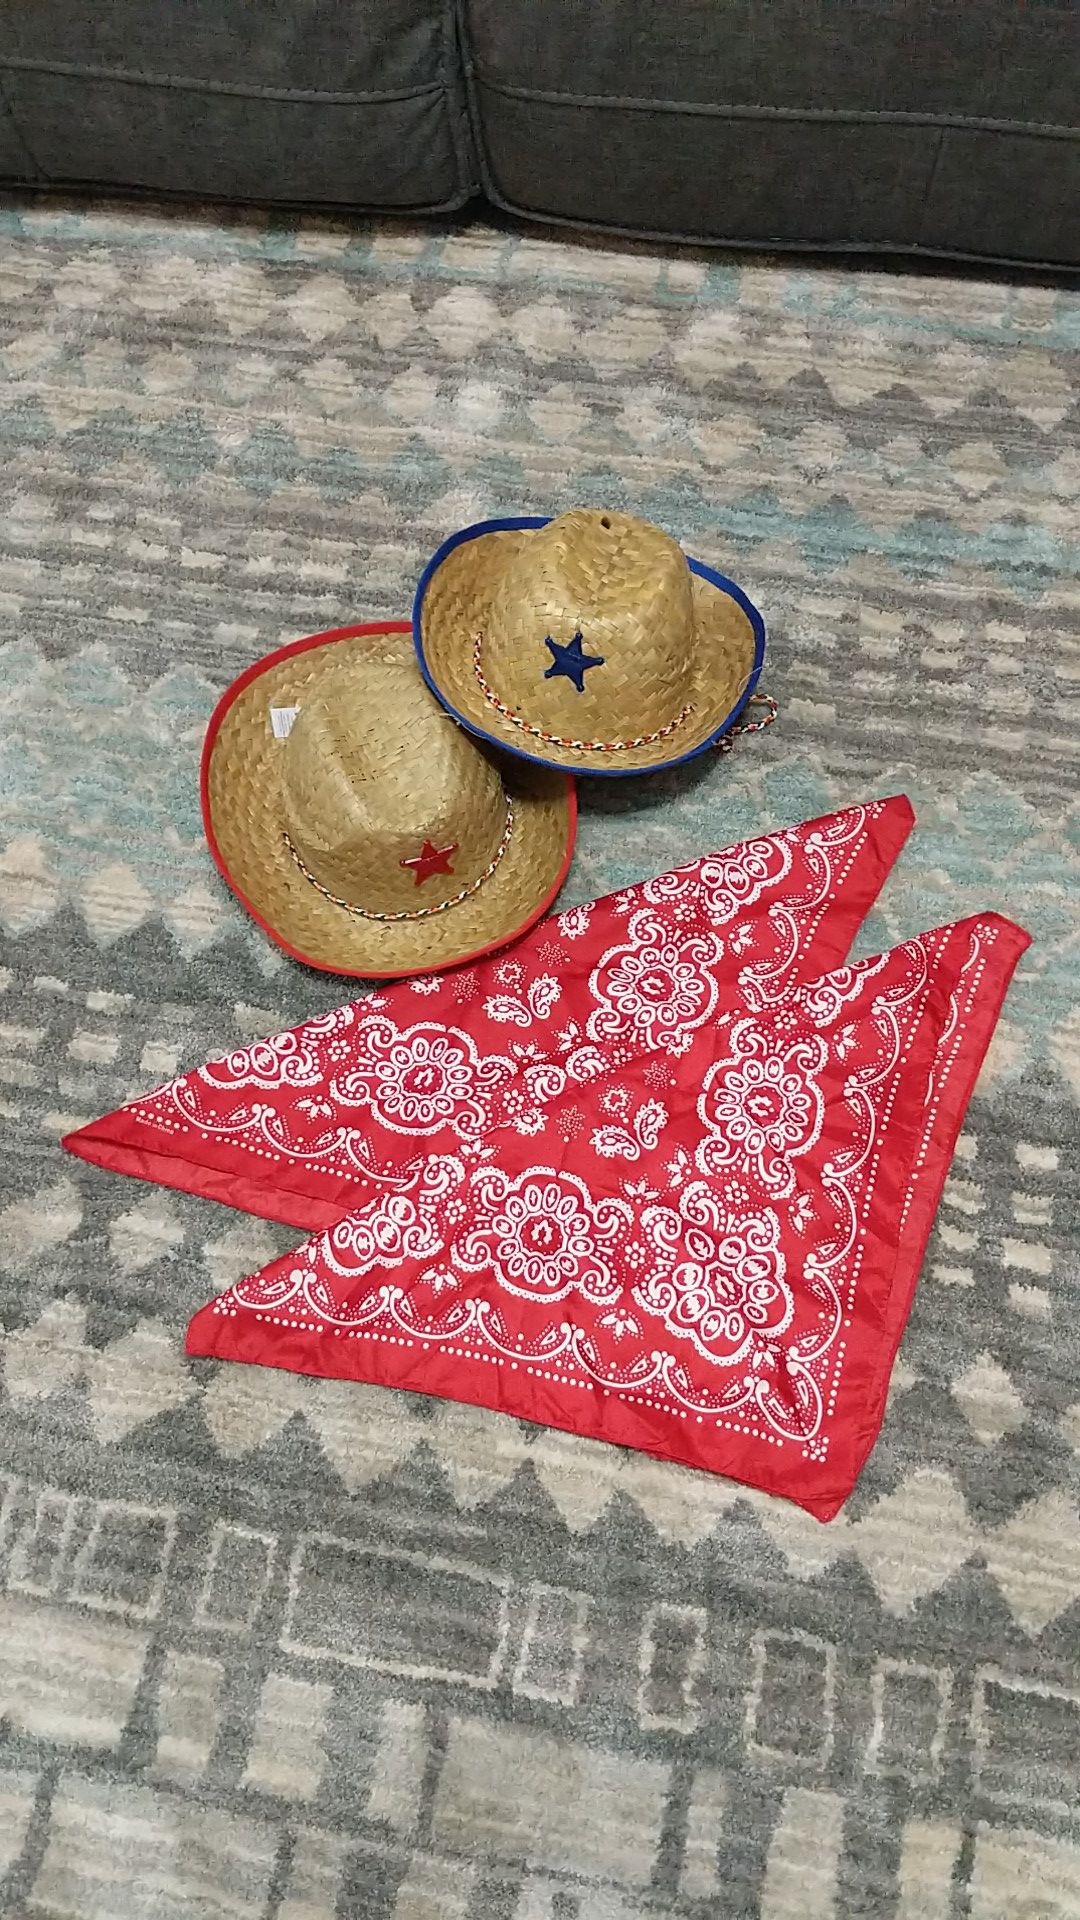 Cowboy/Cowgirl Costume Pieces